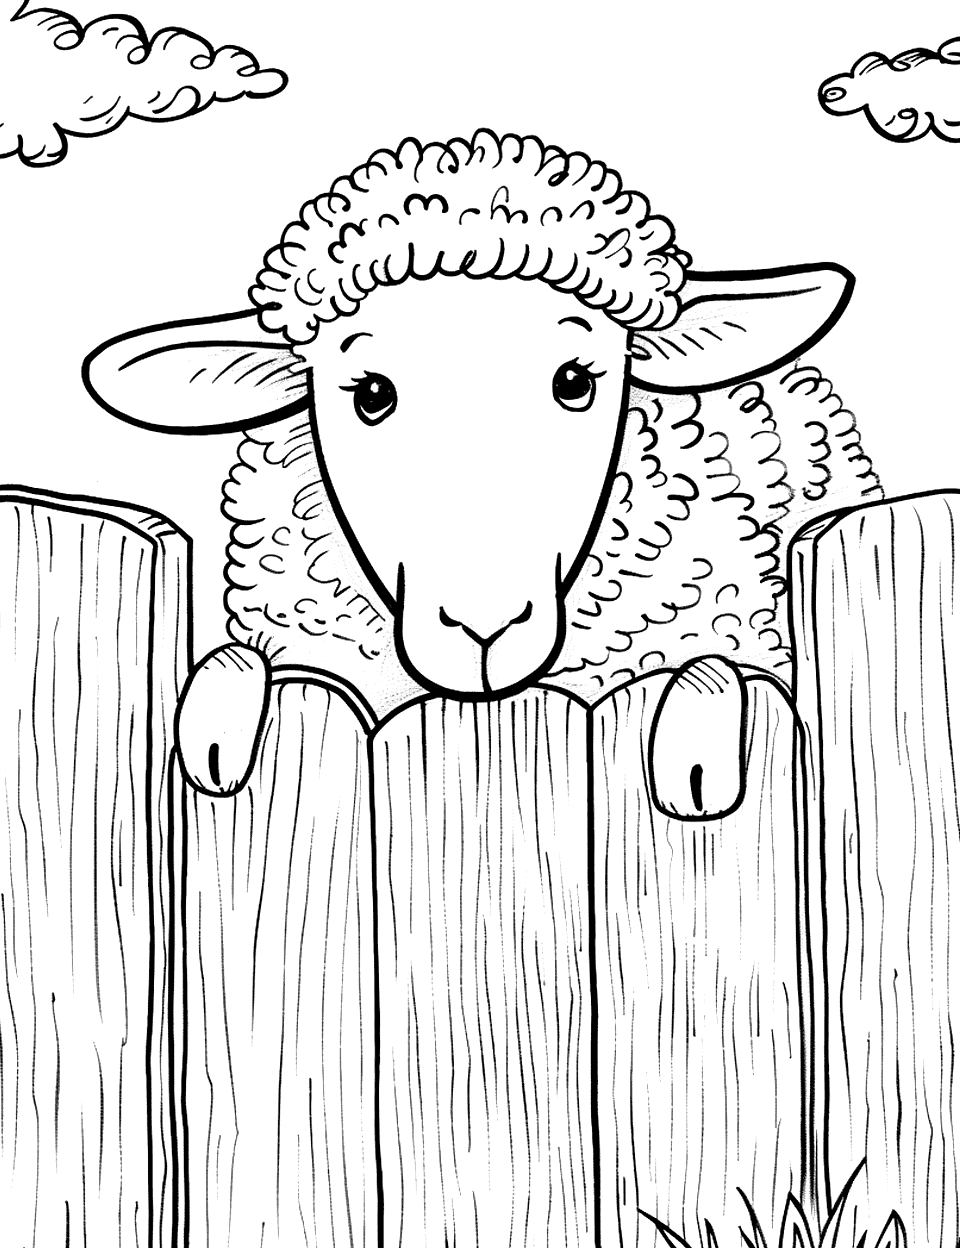 Curious Sheep at the Fence Coloring Page - A curious sheep peeking from the top of a wooden fence.